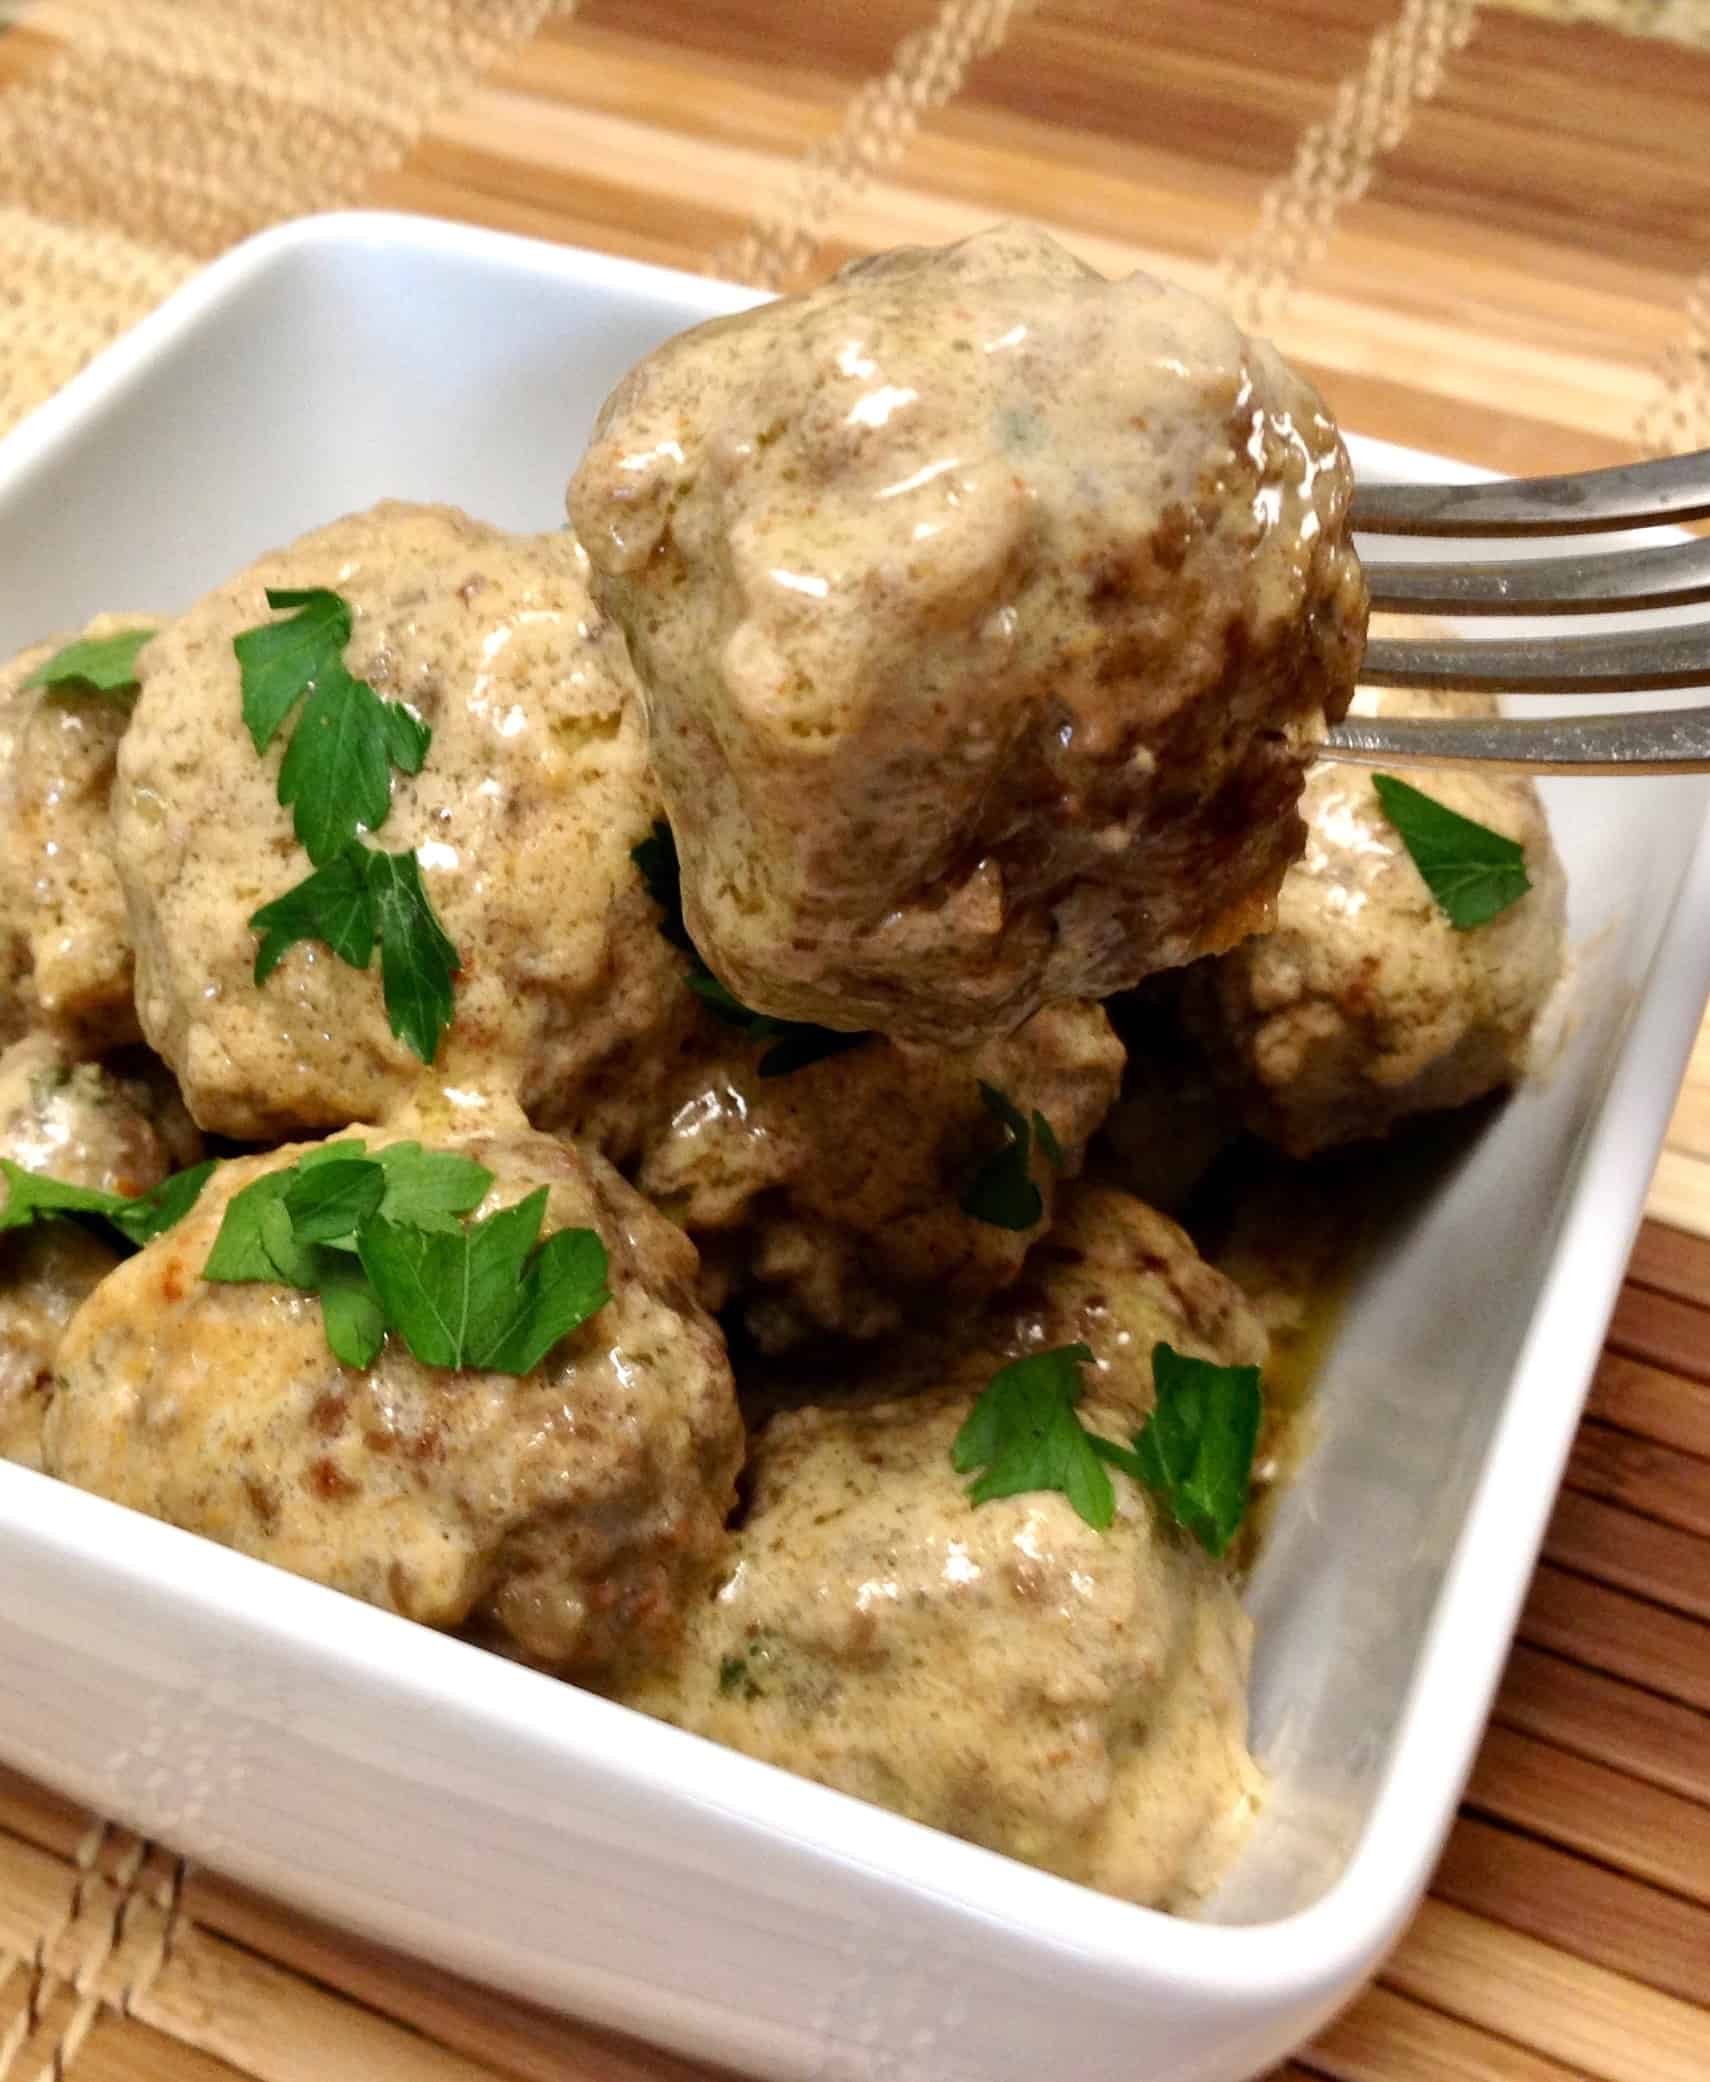 Swedish Meatballs in white bowl with a fork holding up one